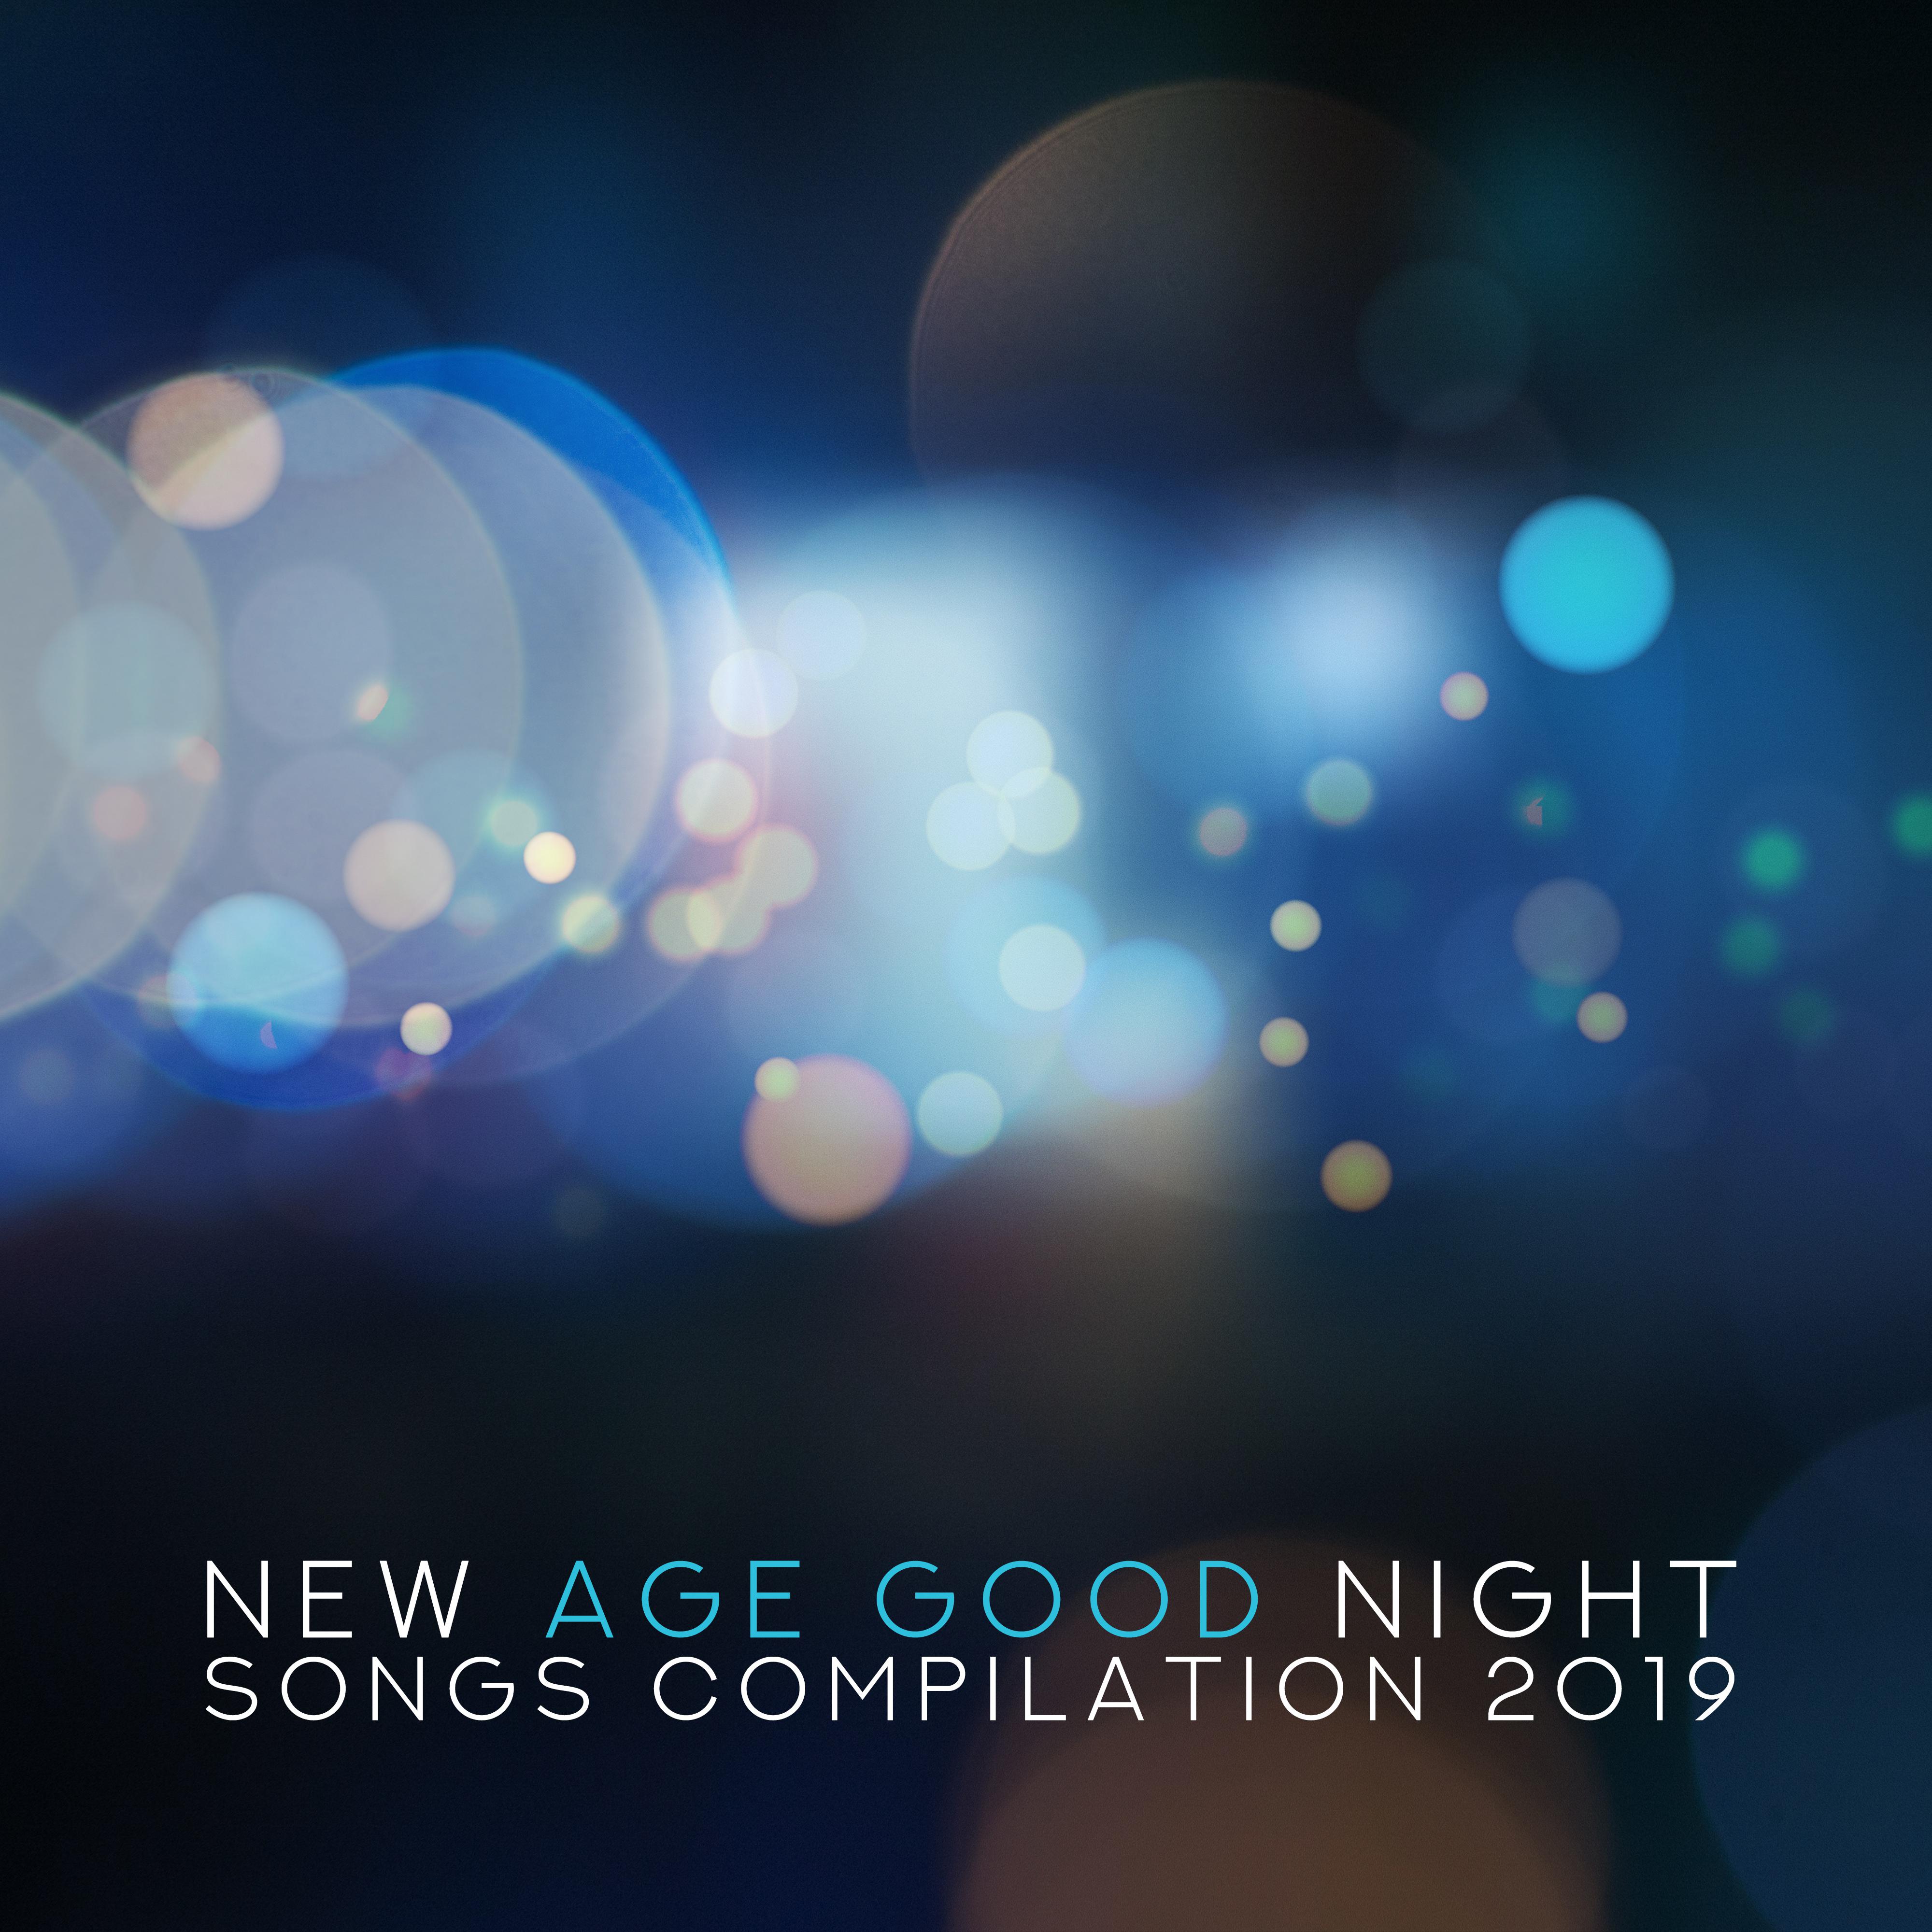 New Age Good Night Songs Compilation 2019